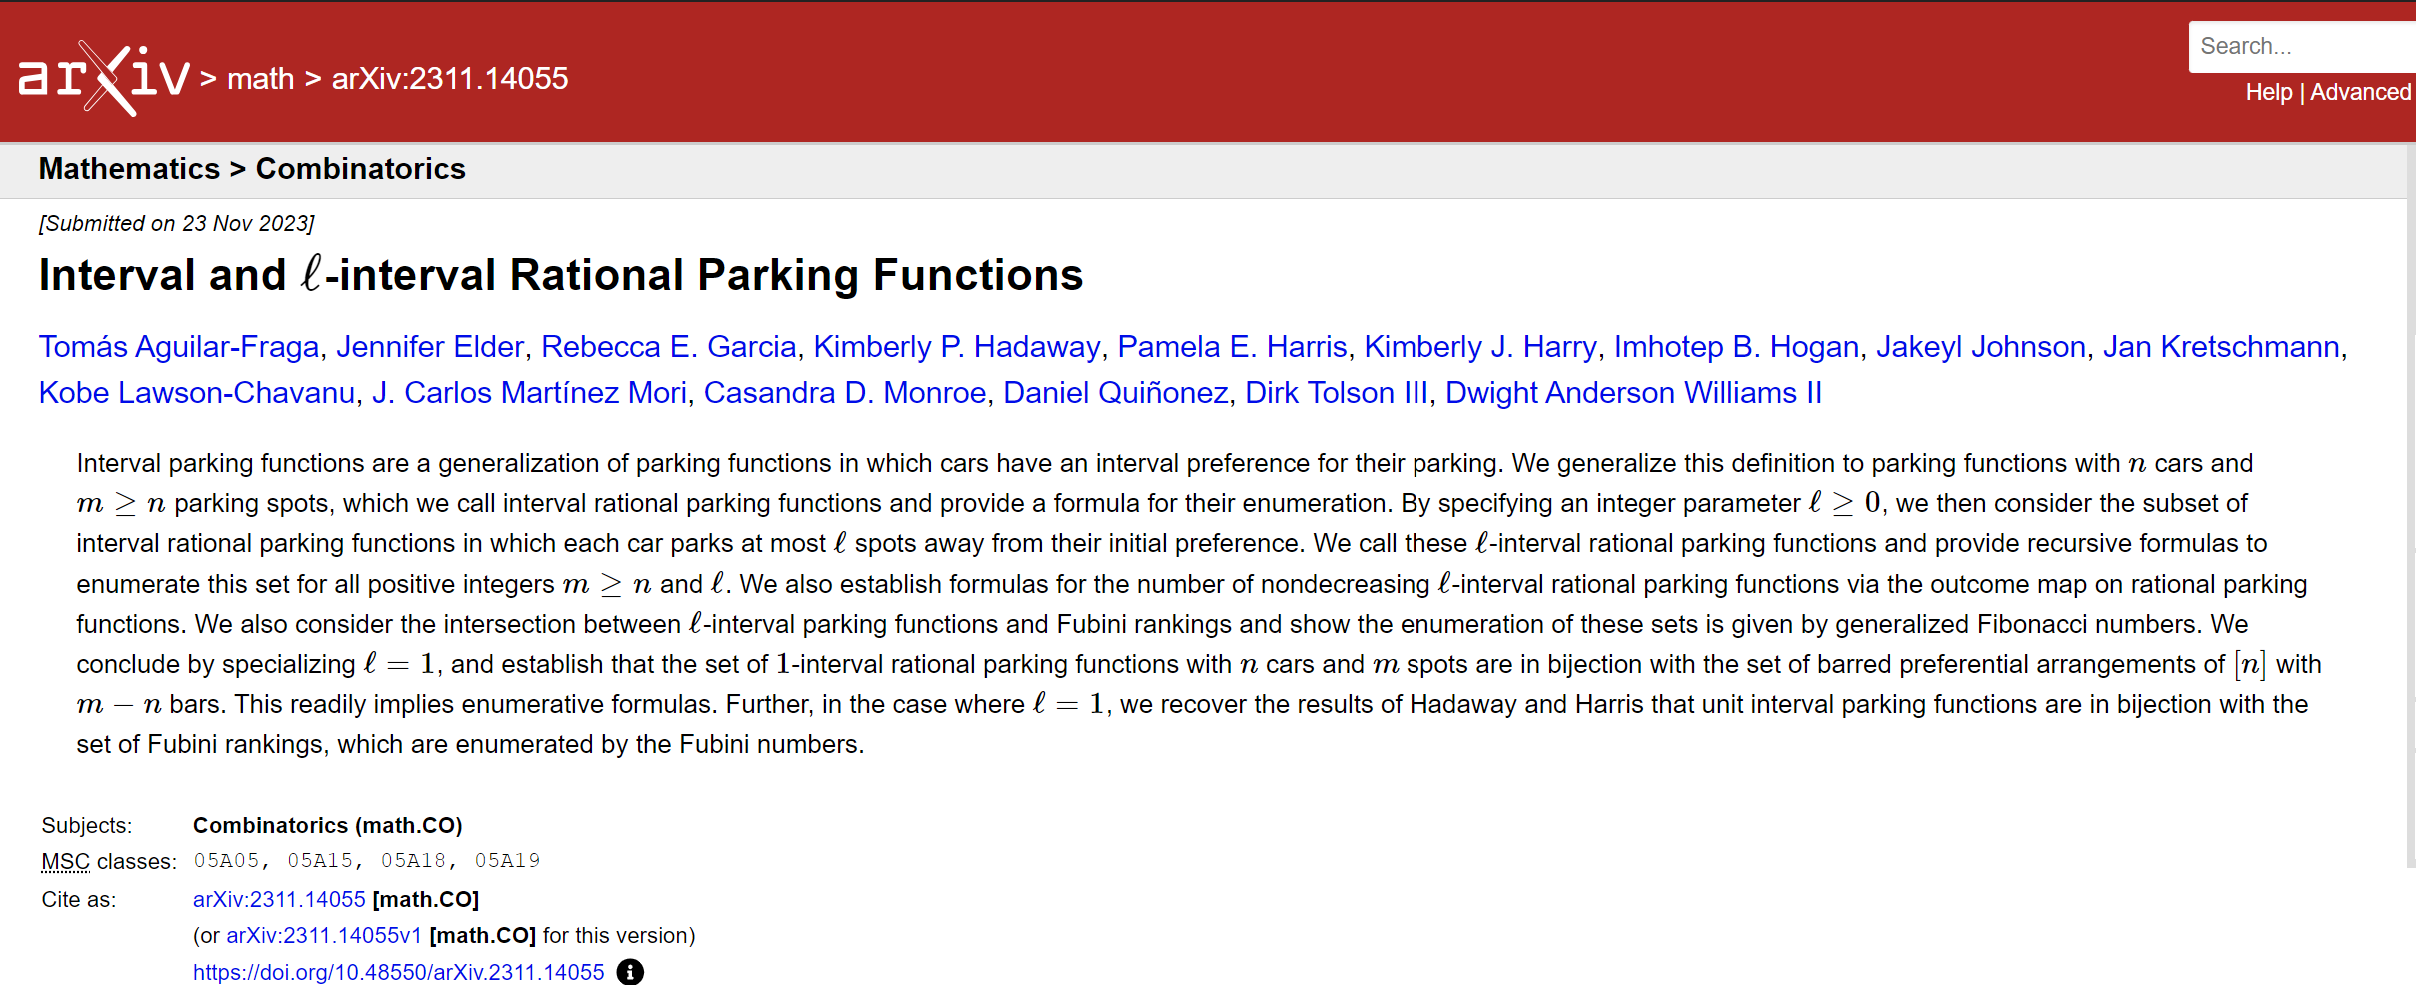 Preprint 2023#1 (#4): Interval and ℓ-interval parking functions